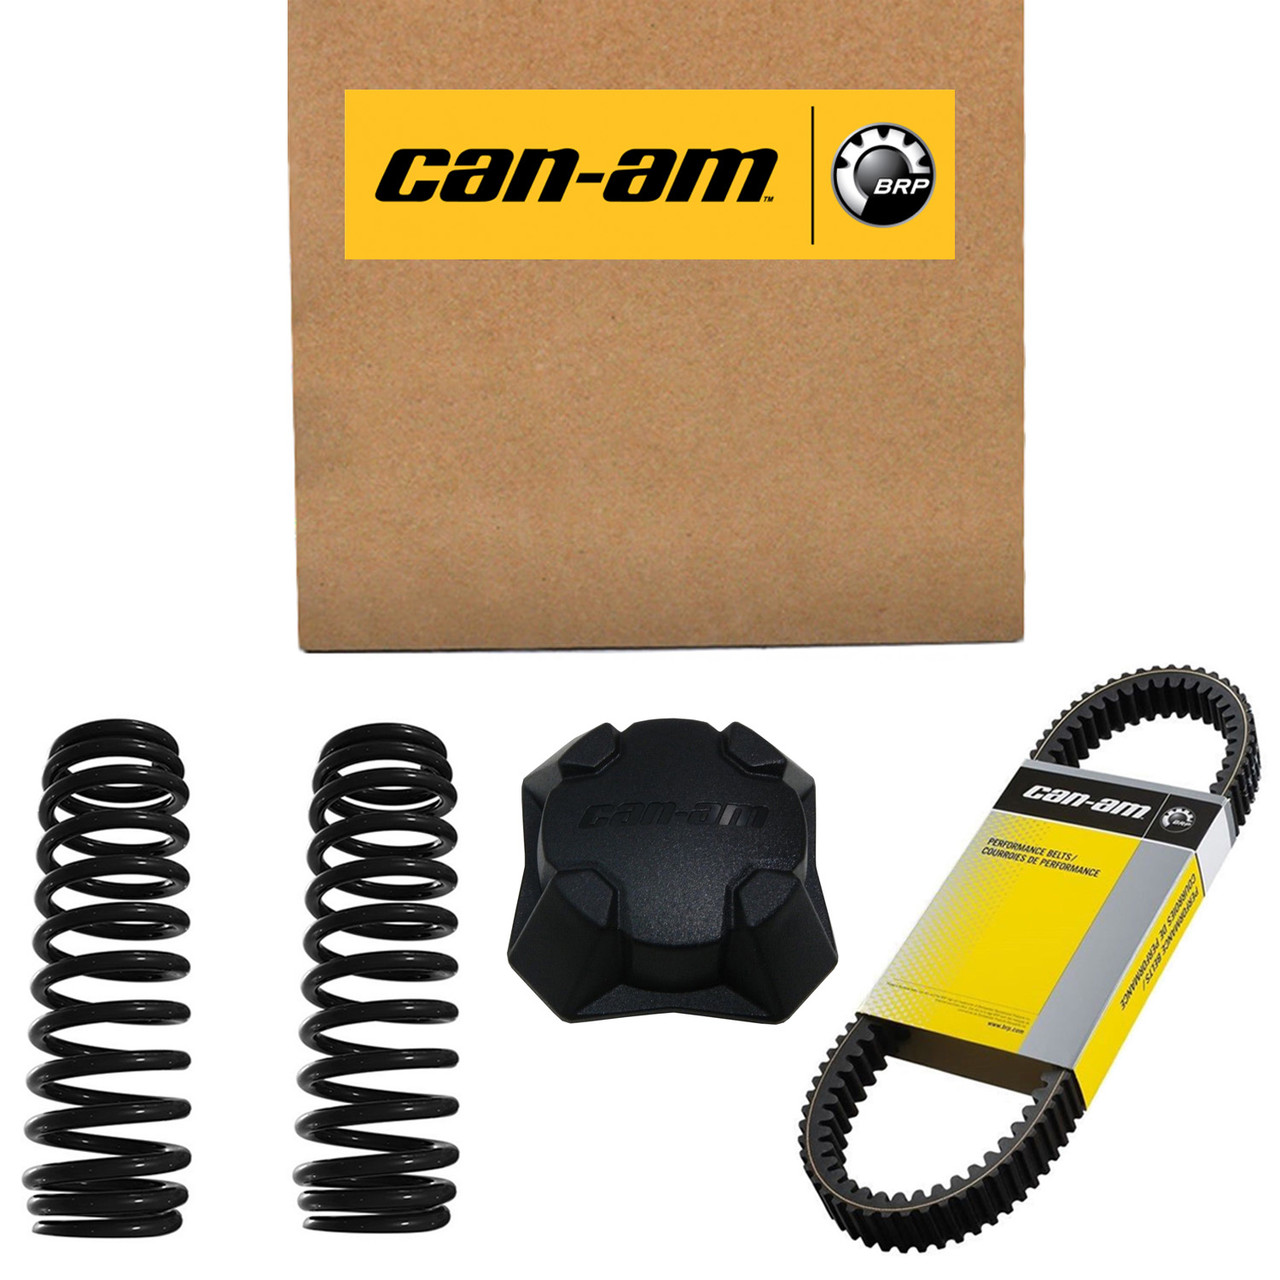 Can-Am New OEM Rh Skid Plate, S40150RCA000